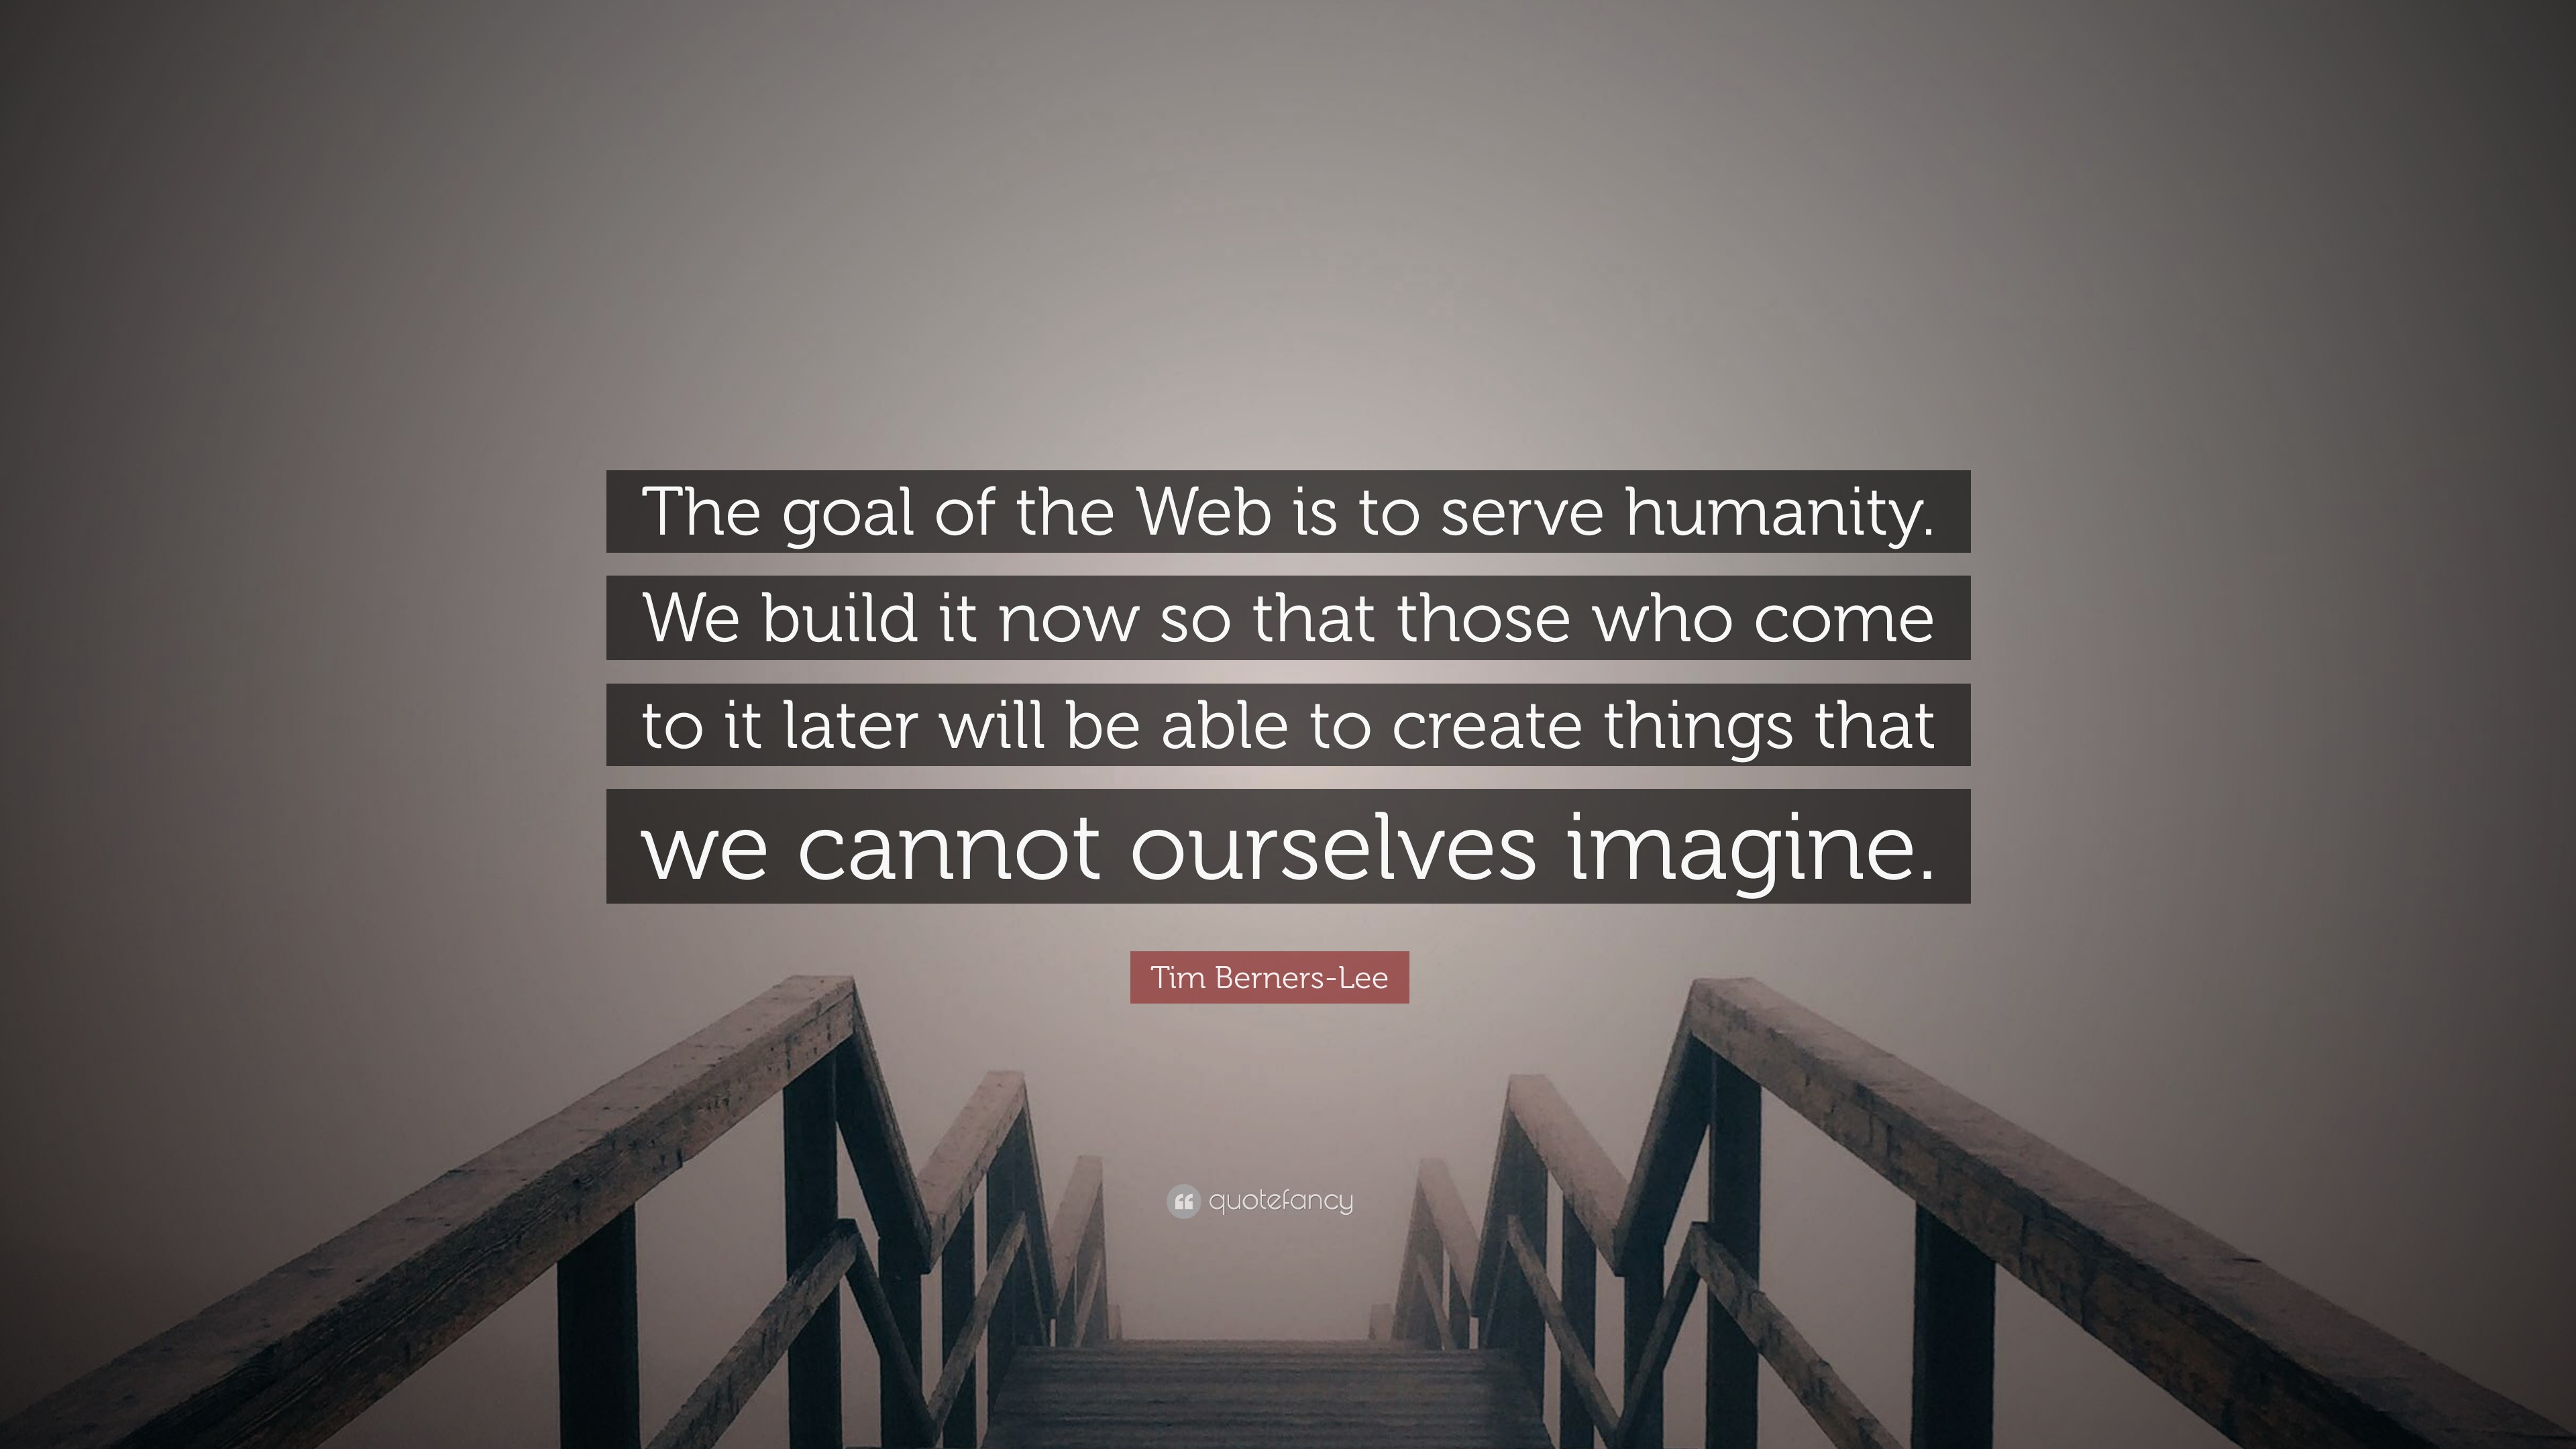 Tim Berners-Lee Quote: “The goal of the Web is to serve humanity. We build now so that those who come to it later be to create thin...”